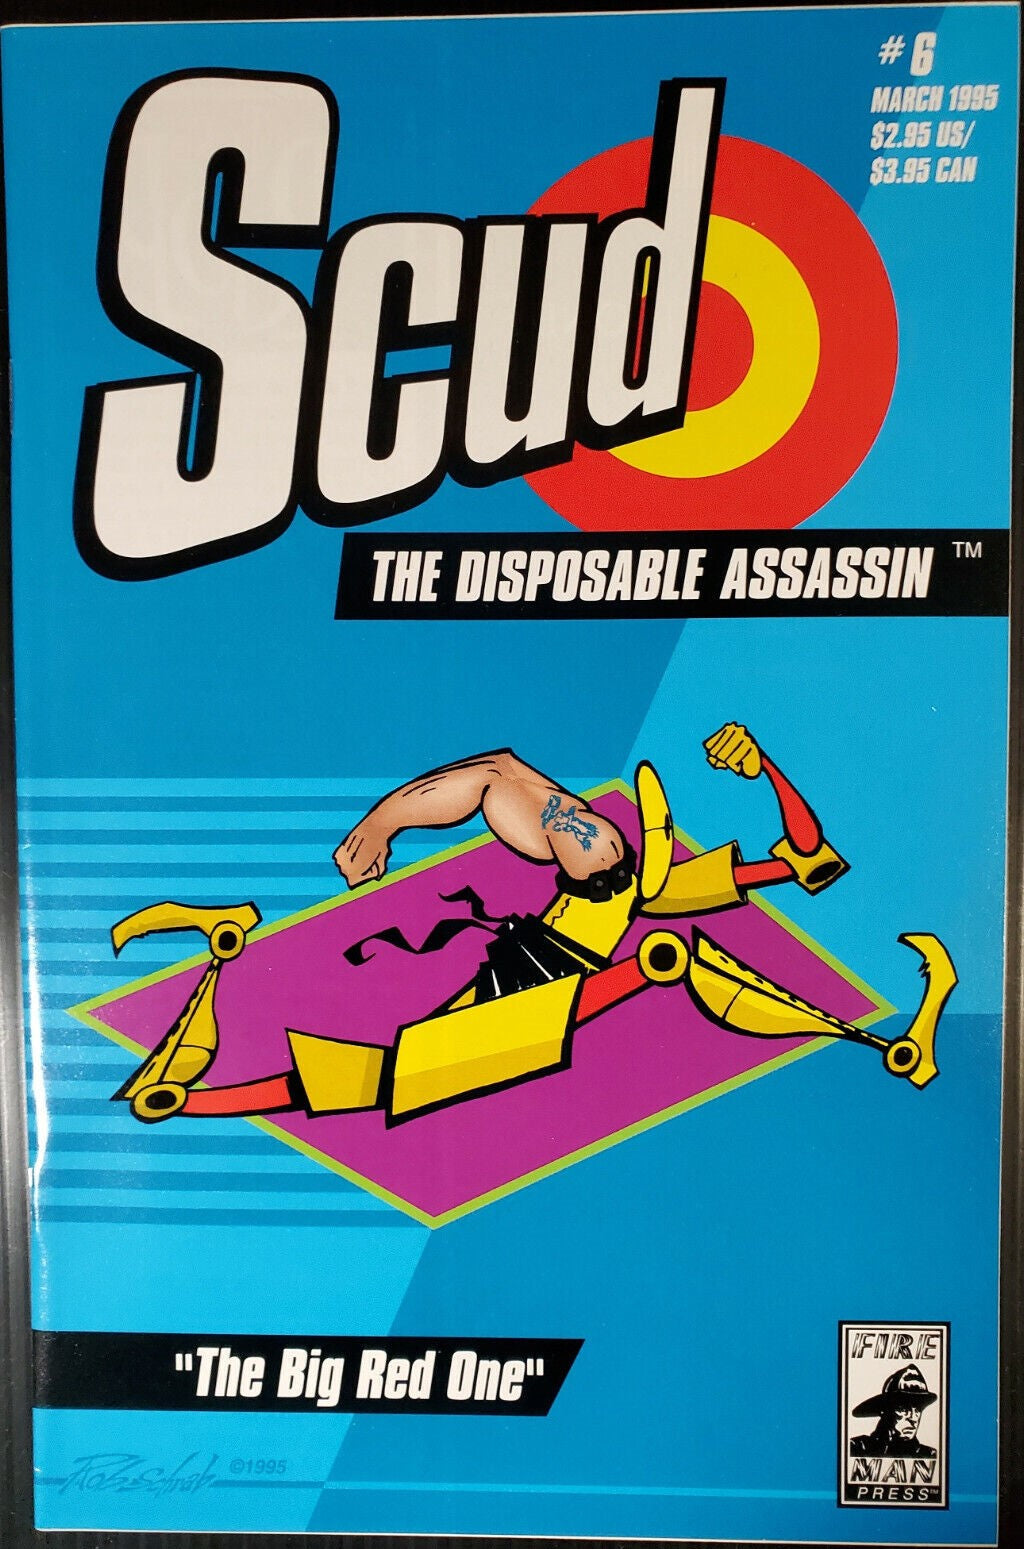 SCUD The Disposable Assassin #6